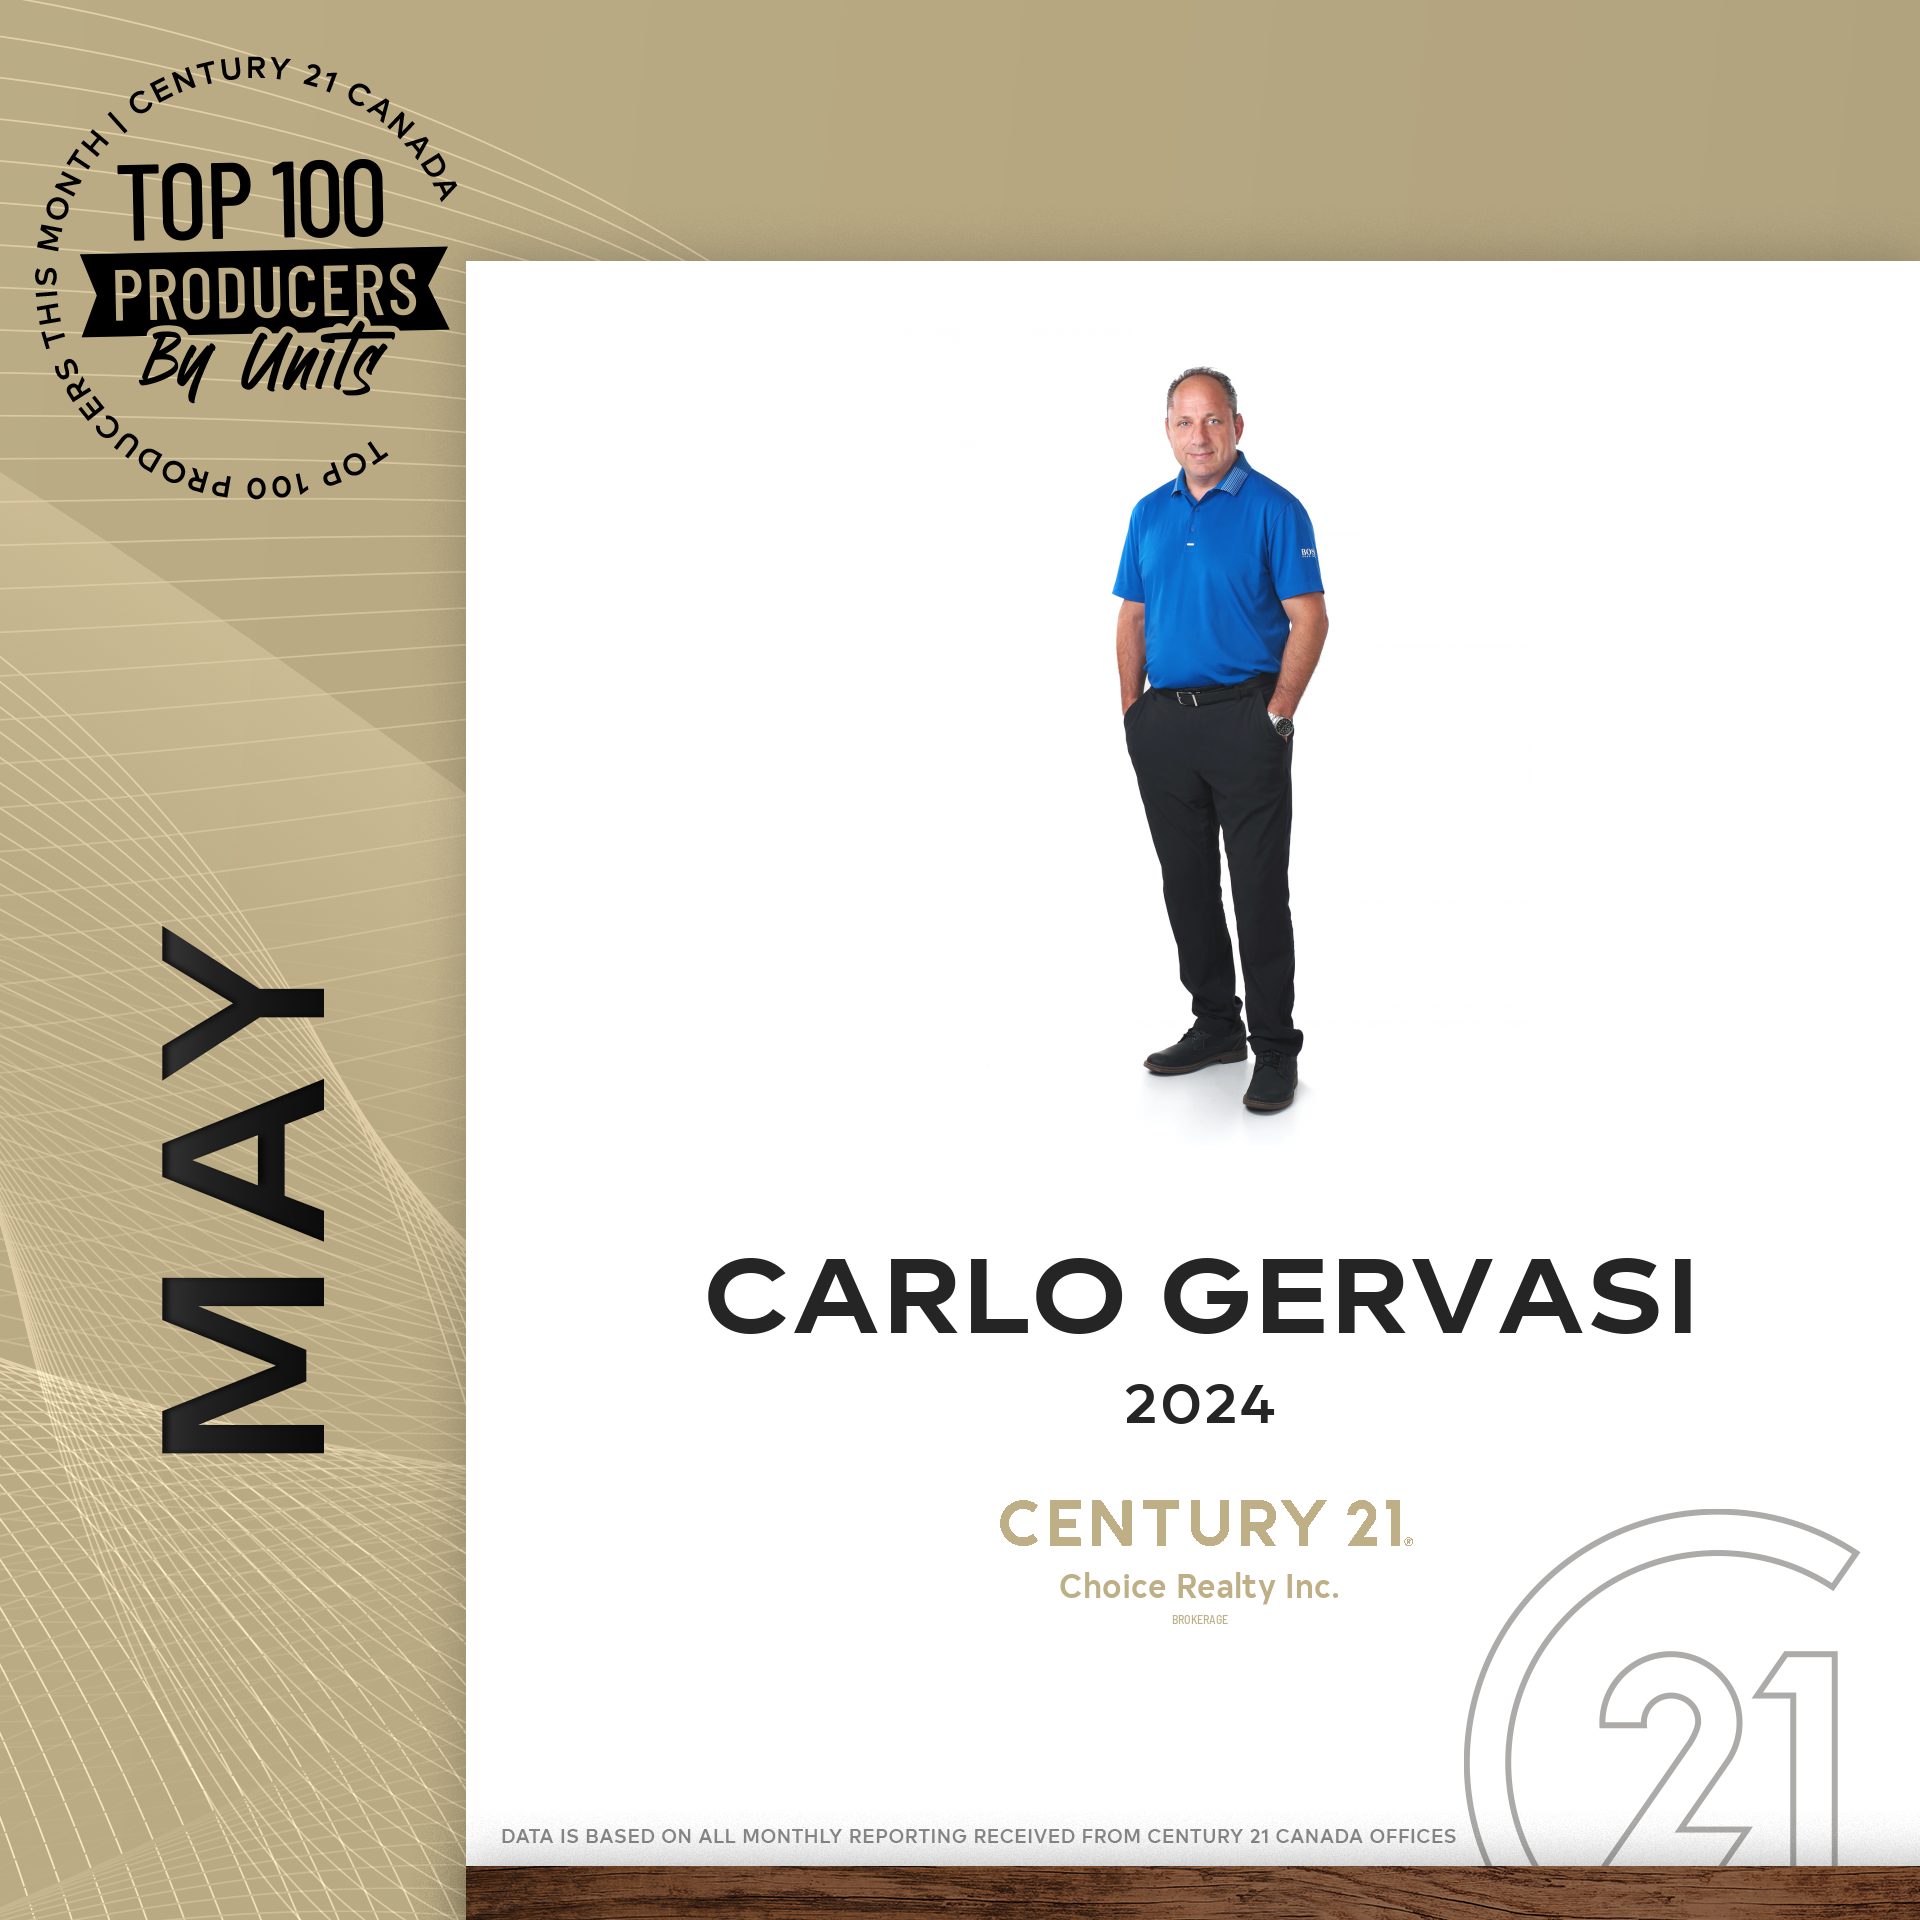 Carlo Gervasi - Top 100 Century21 Realtor Producer by Units for May 2024